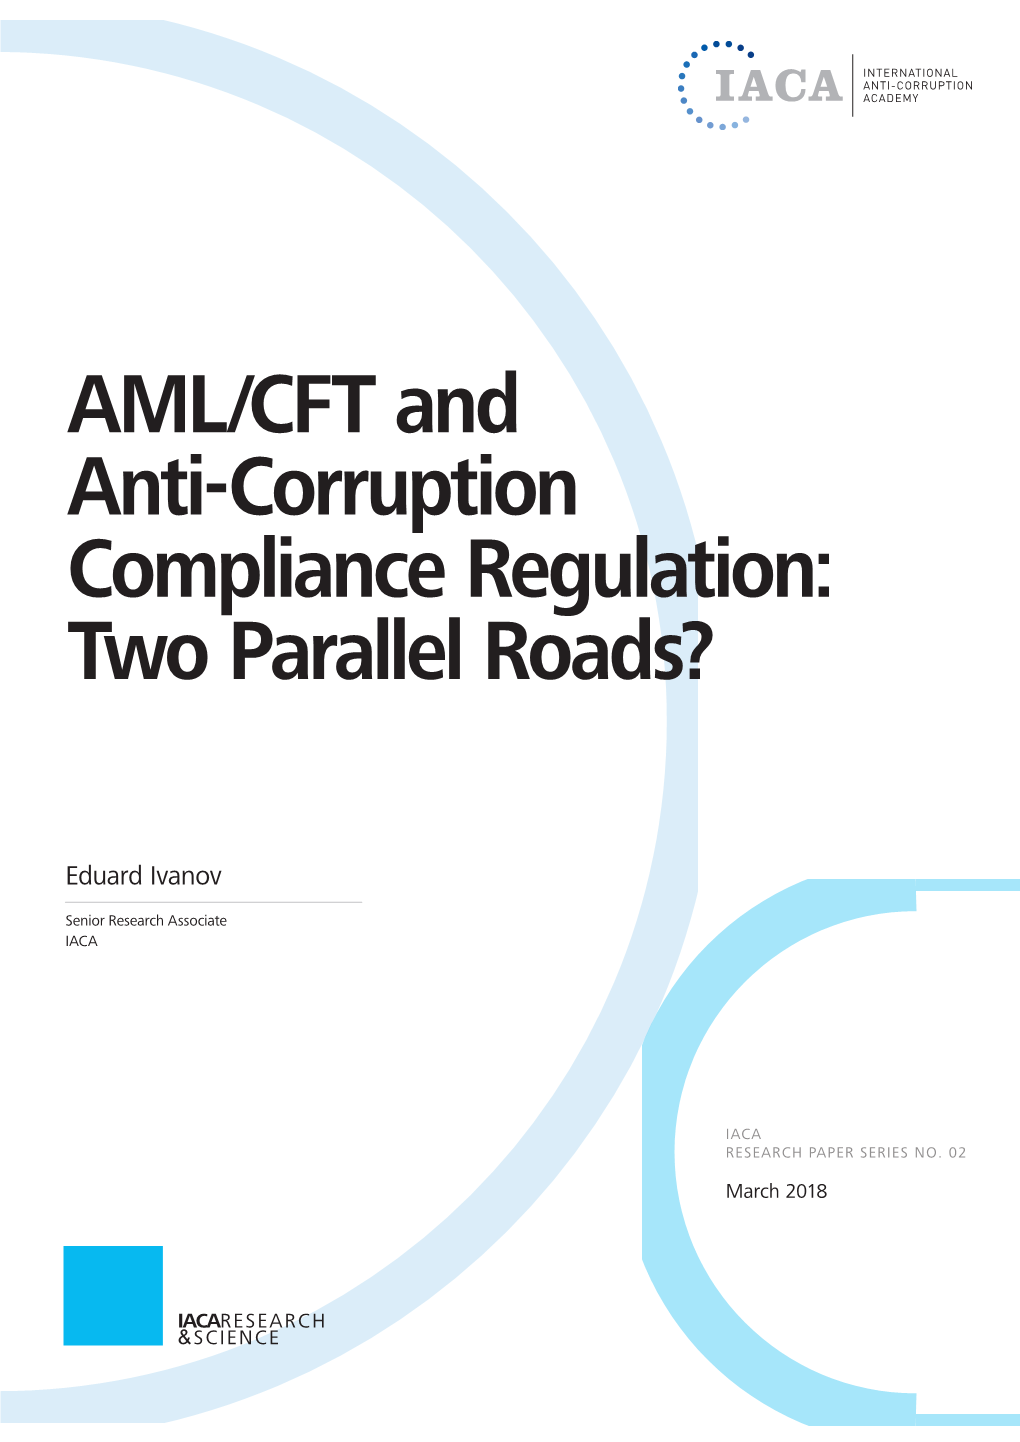 AML/CFT and Anti-Corruption Compliance Regulation: Two Parallel Roads?